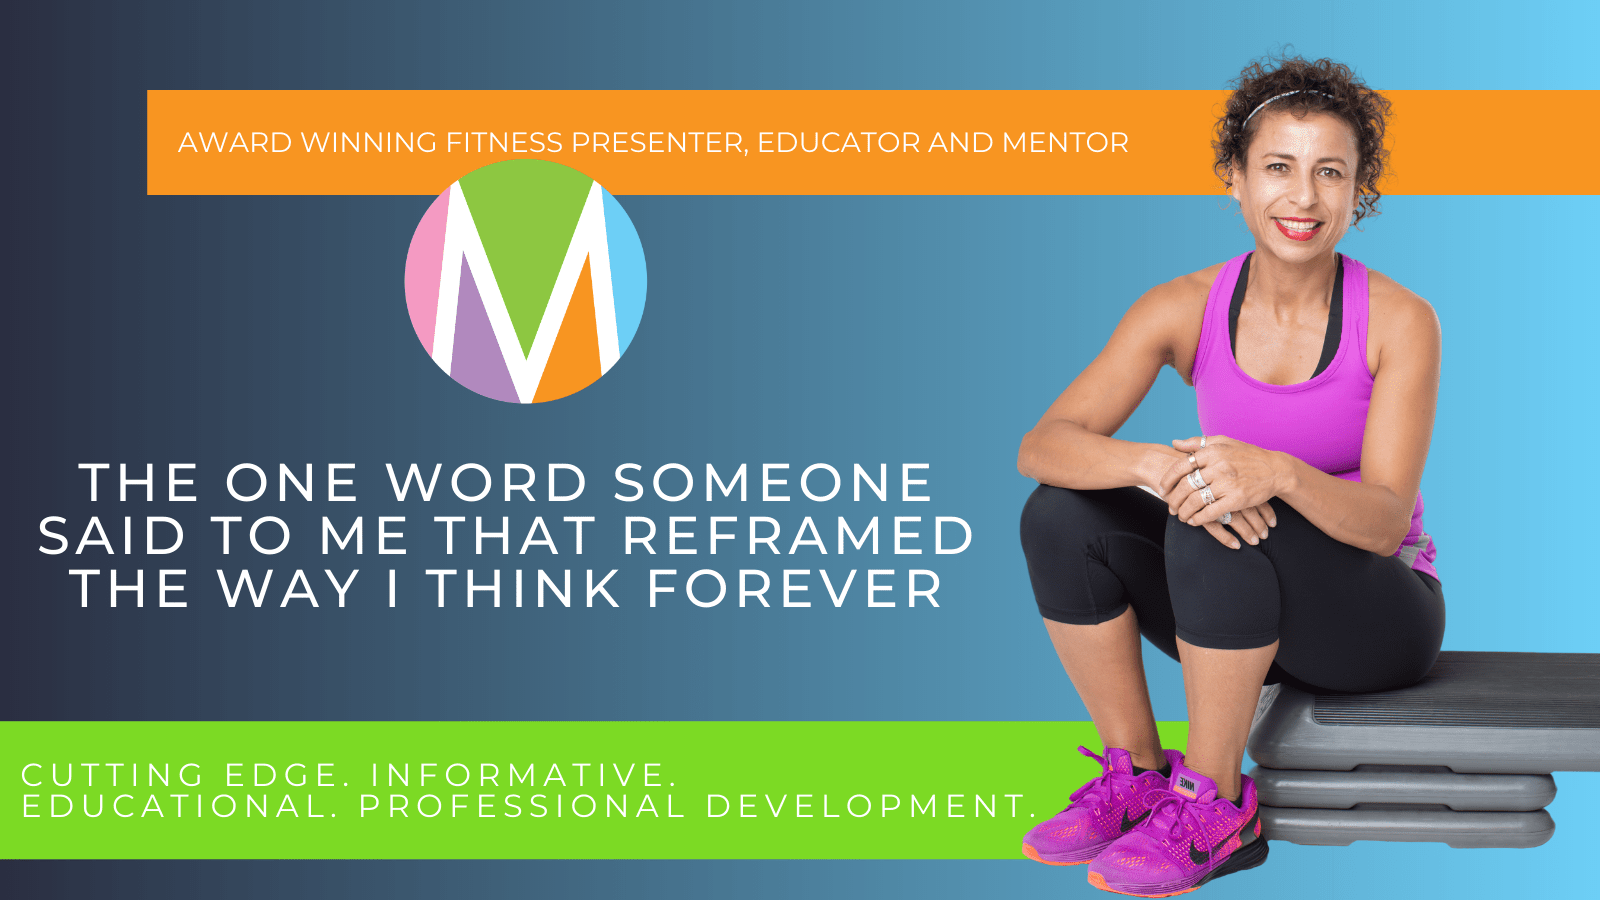 blog the one word someone said to me that reframed the way I think forever marietta mehanni education professional development group fitness personal training